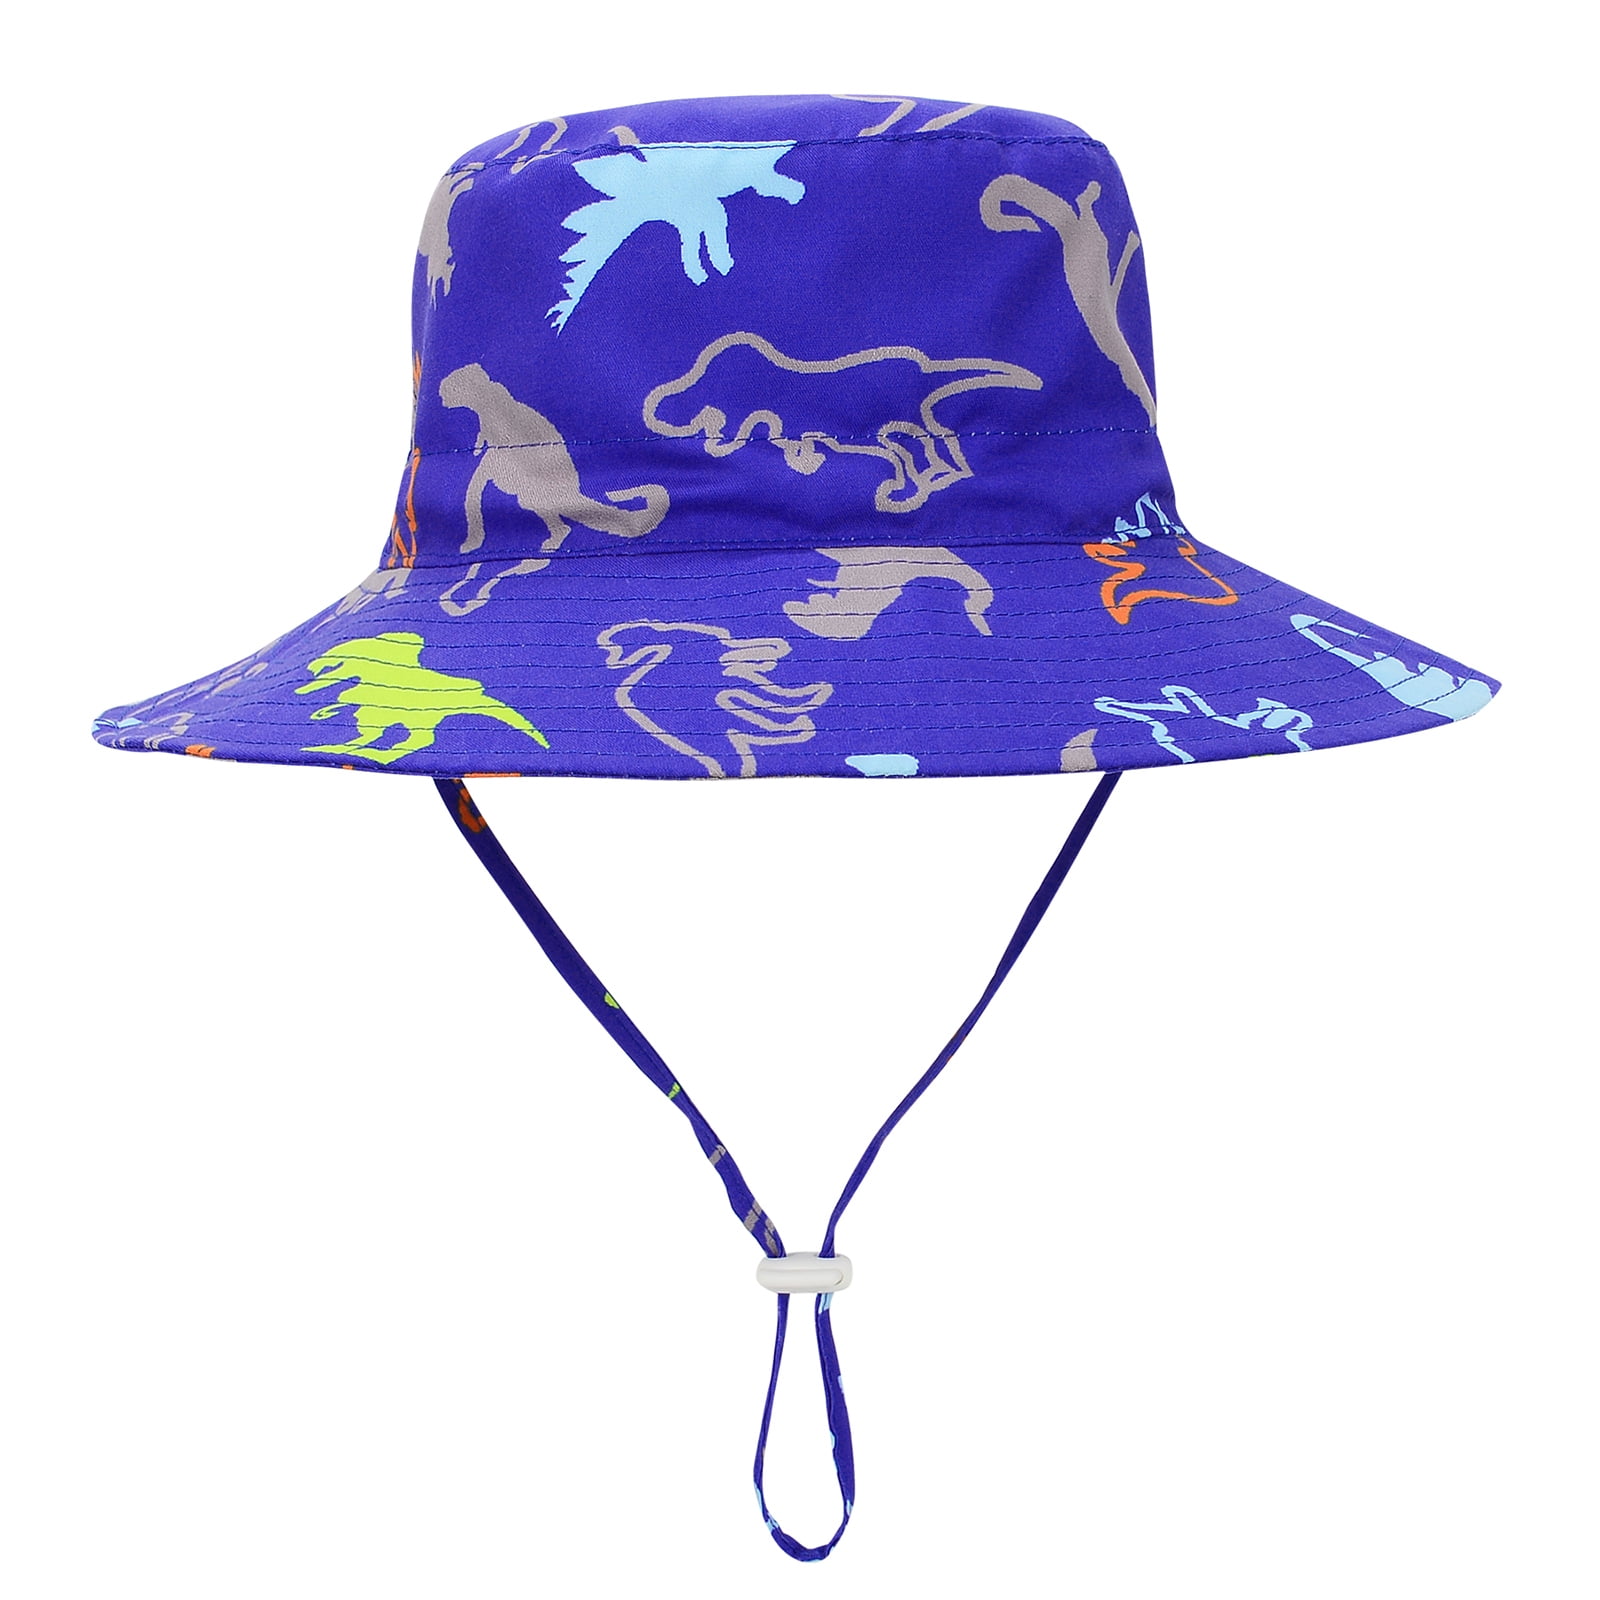 Realhomelove UPF 50+ Beach Baby Sun Hat Sun Protection Cute Wide Brim  Summer Baby Boy Bucket Hats Toddler Sun Hats for Girl 